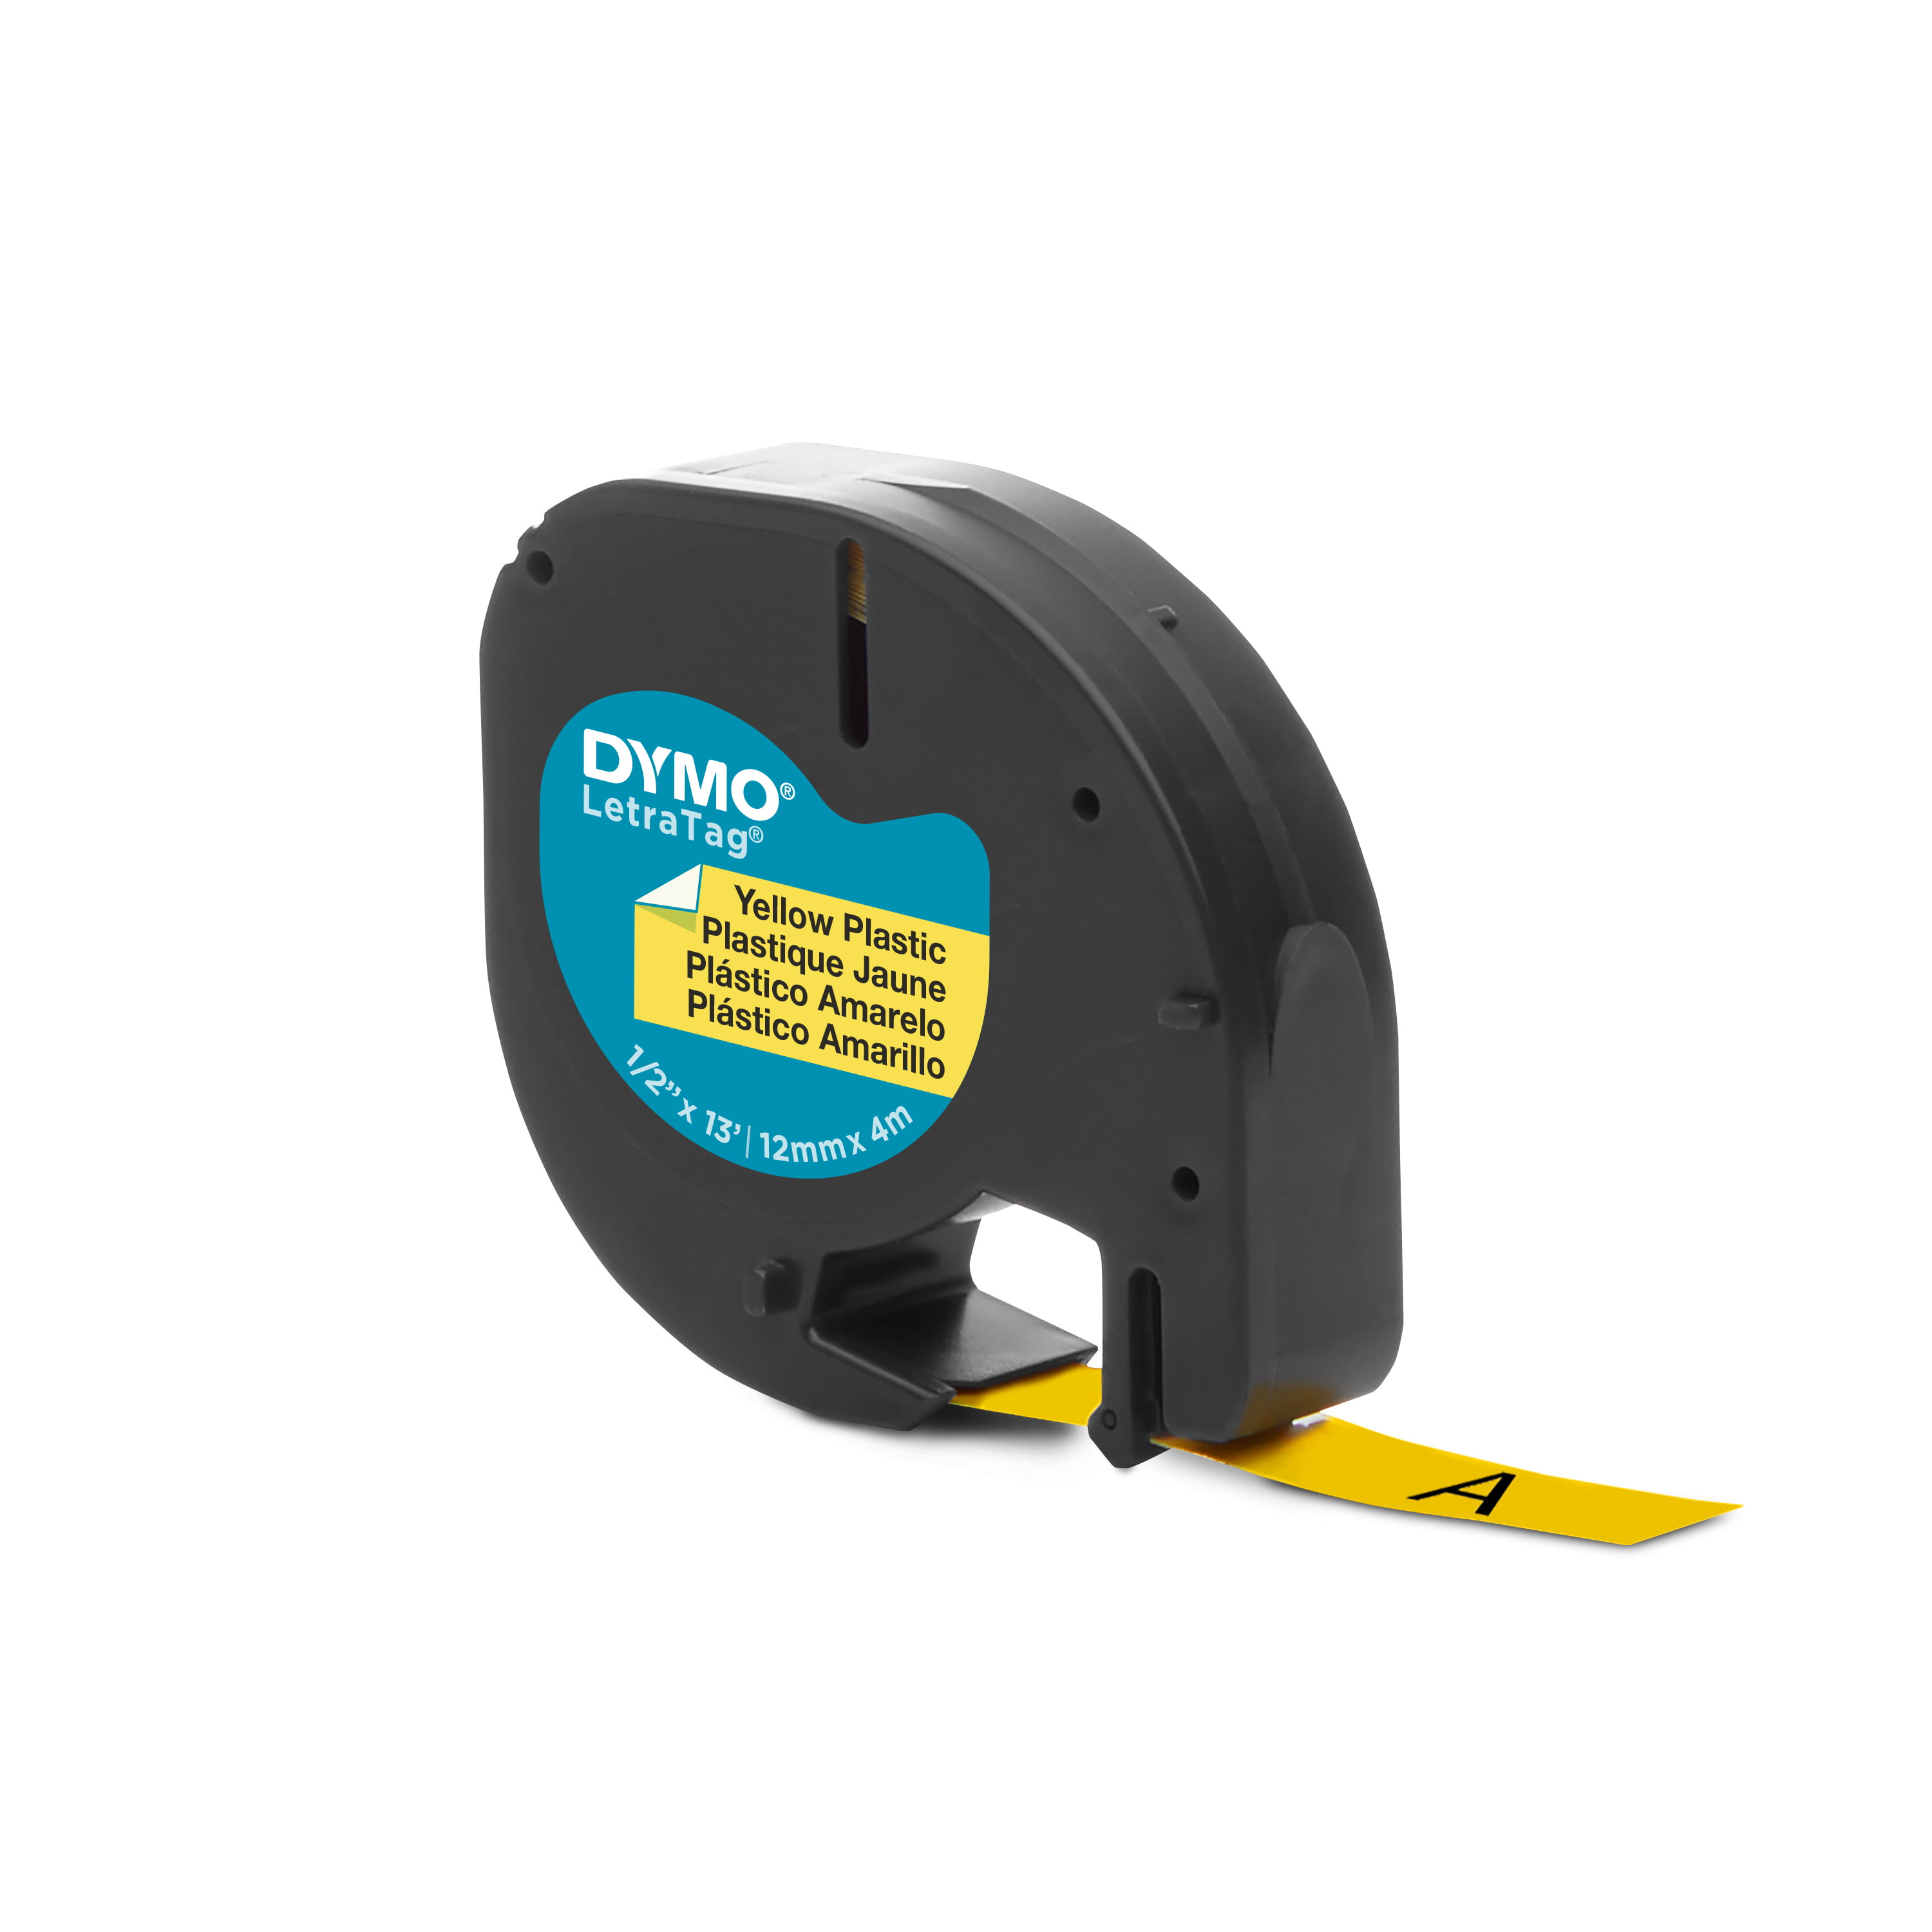 3PK 1/2'' Black on Yellow Plastic Label Tape for Dymo Letra Tag LT 91332 QX50 